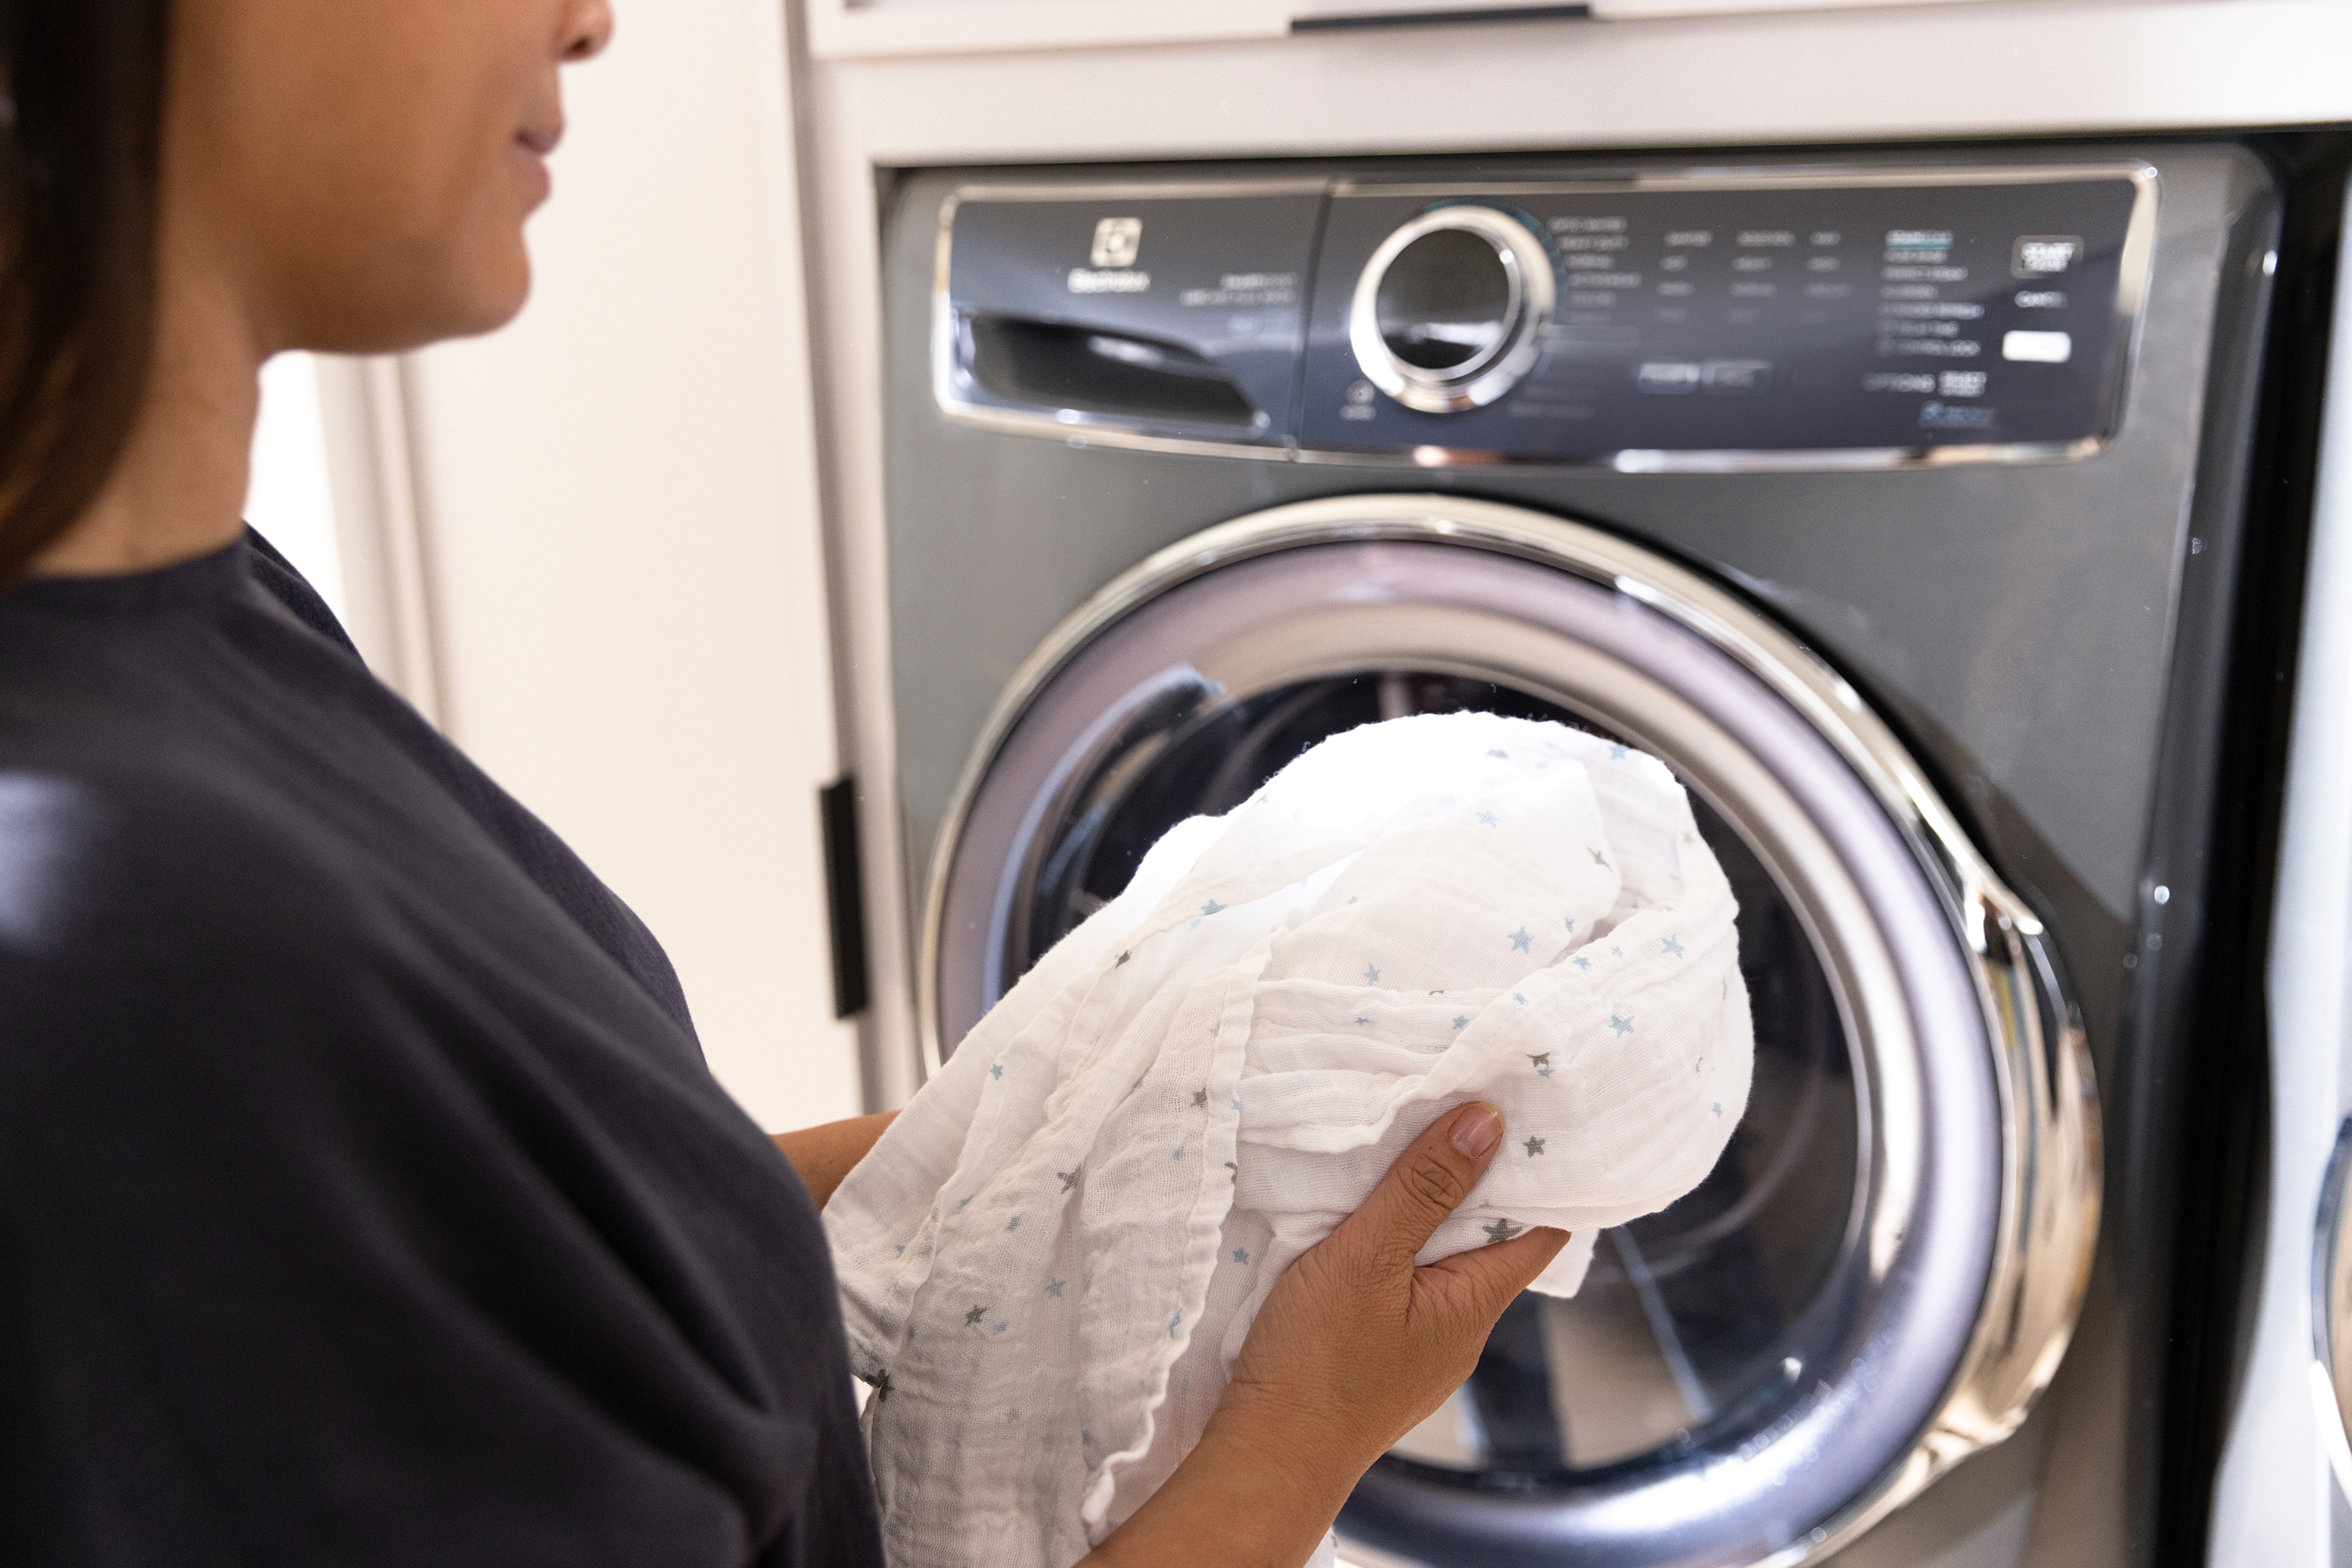 How to Clean Front-Loading Washing Machine